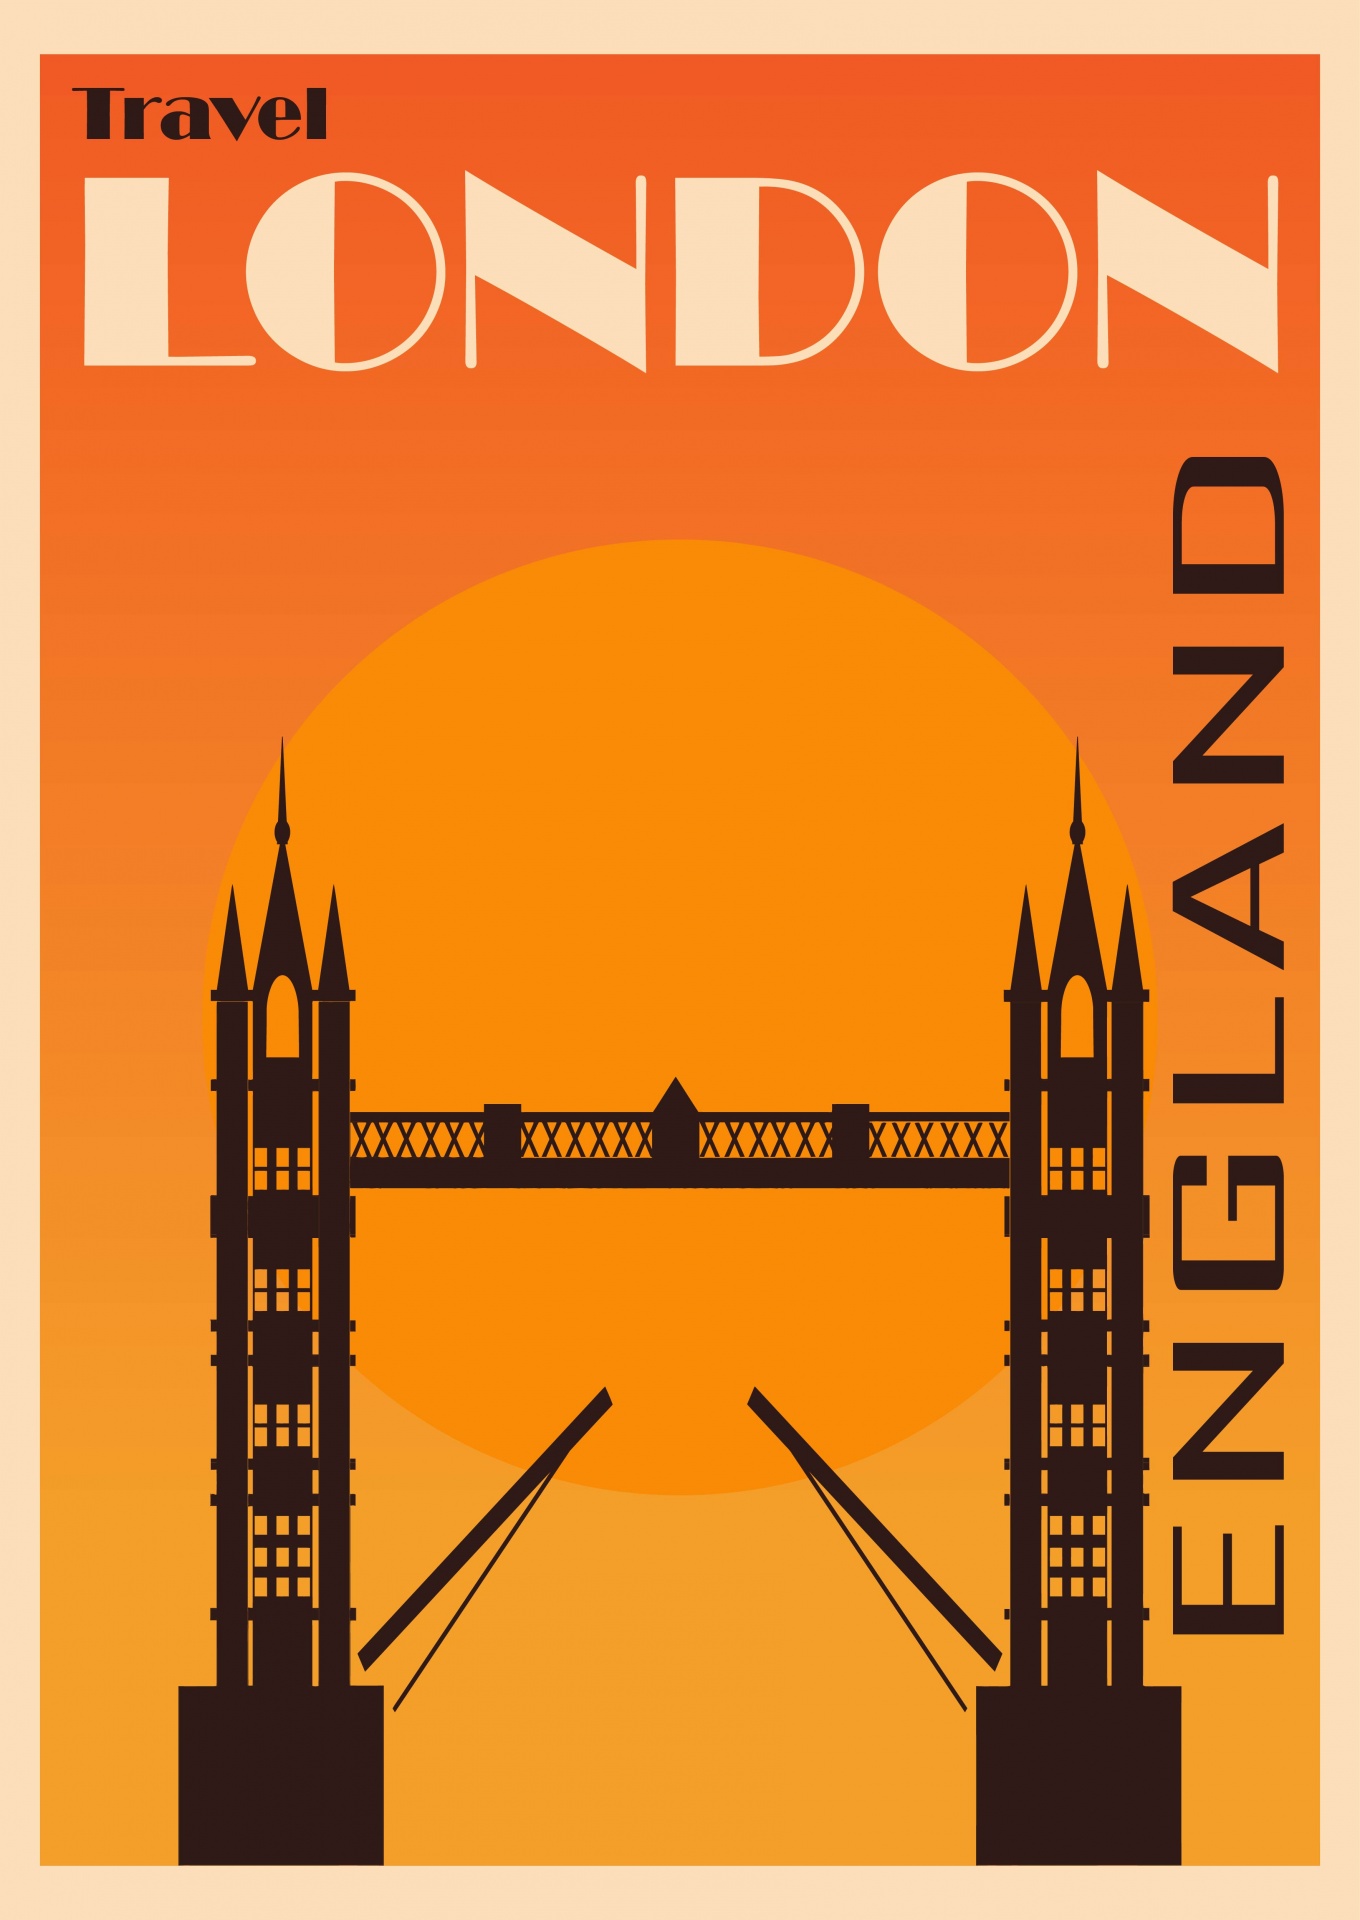 Retro, vintage style yet modern and fresh travel poster for London, England, at sunset with silhouette of tower bridge